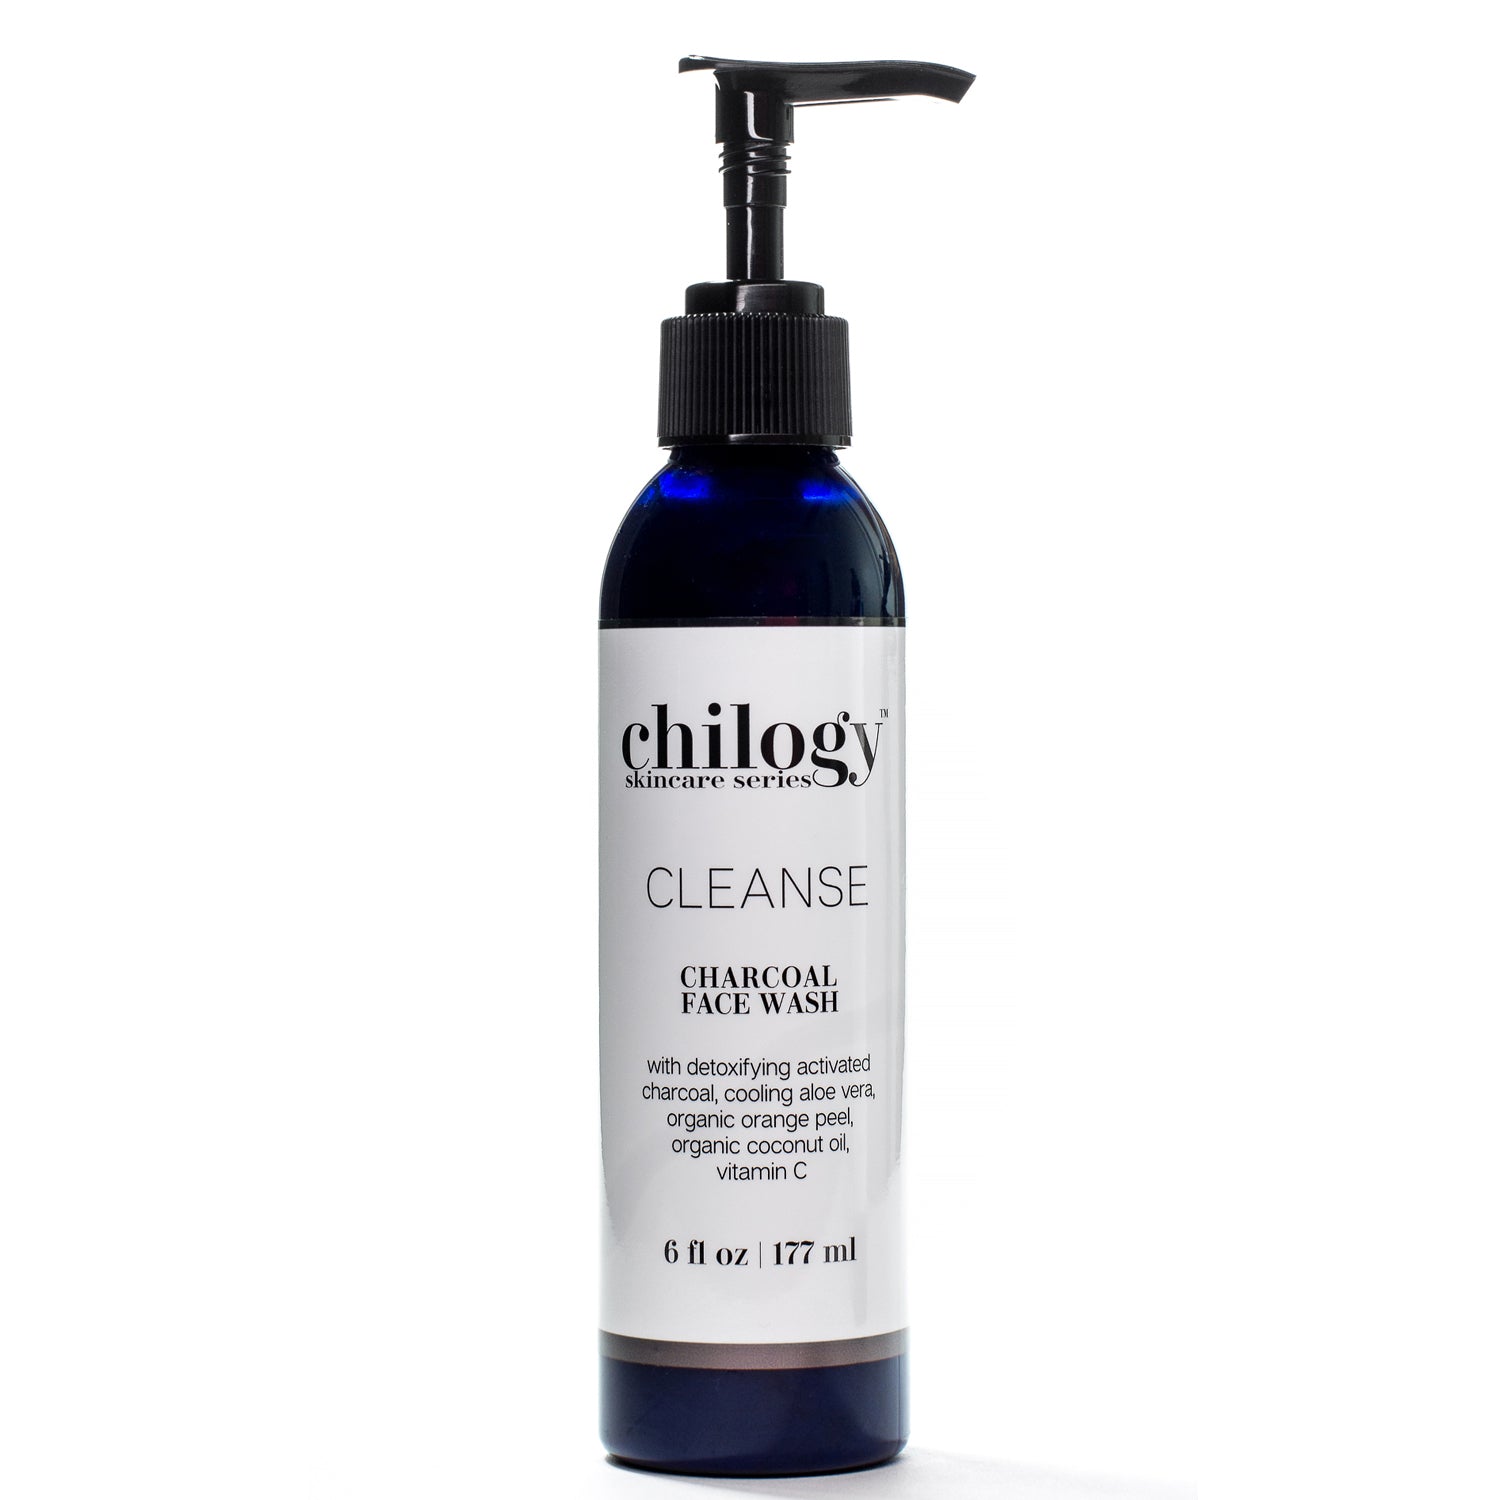 Chilogy - Charcoal Face Wash 6oz